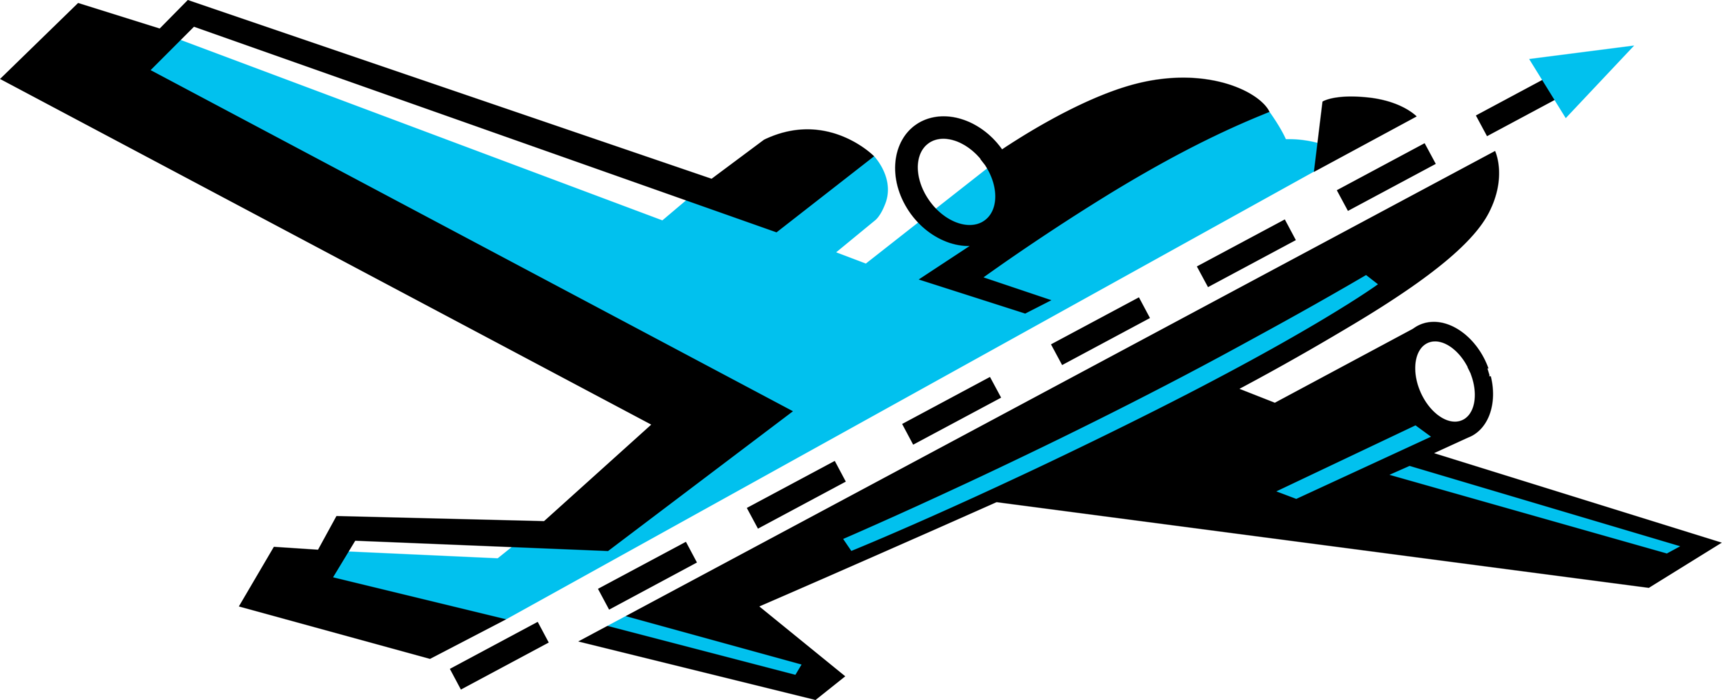 Vector Illustration of Commercial Airline Passenger Jet Aircraft Airplane Takes Off from Airport